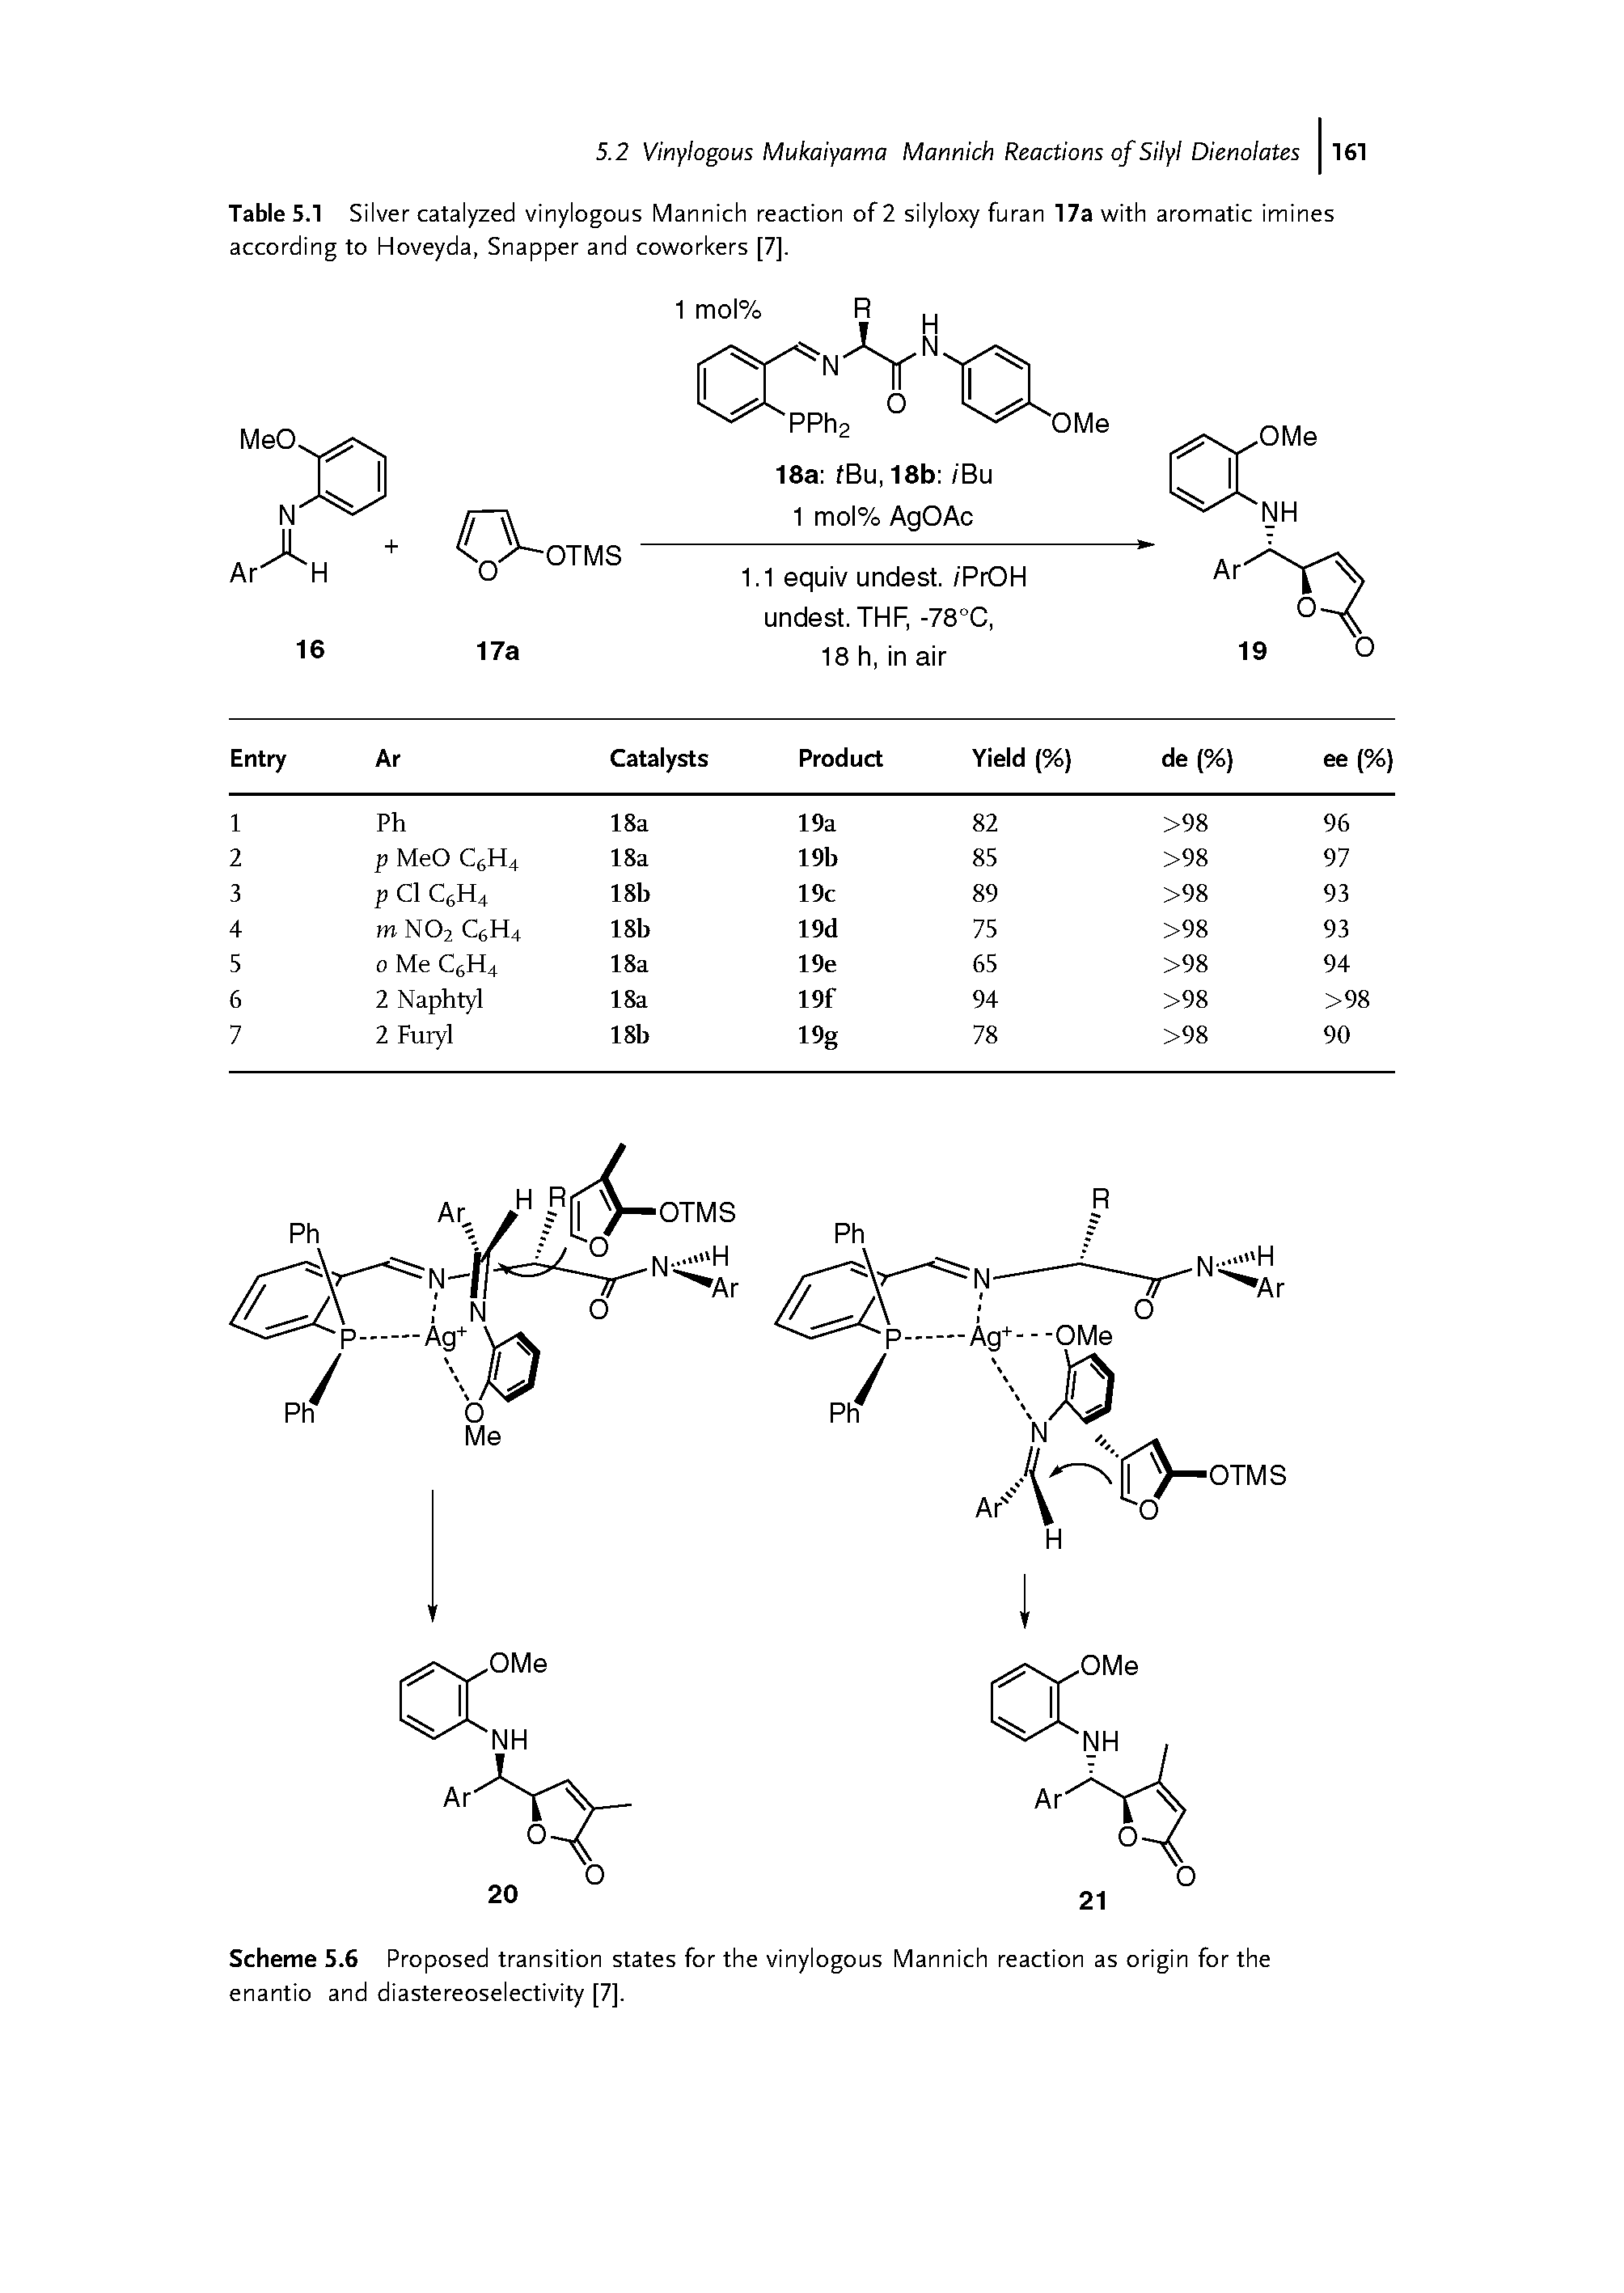 Table 5.1 Silver catalyzed vinylogous Mannich reaction of 2 silyloxy furan 17a with aromatic imines according to Hoveyda, Snapper and coworkers [7].